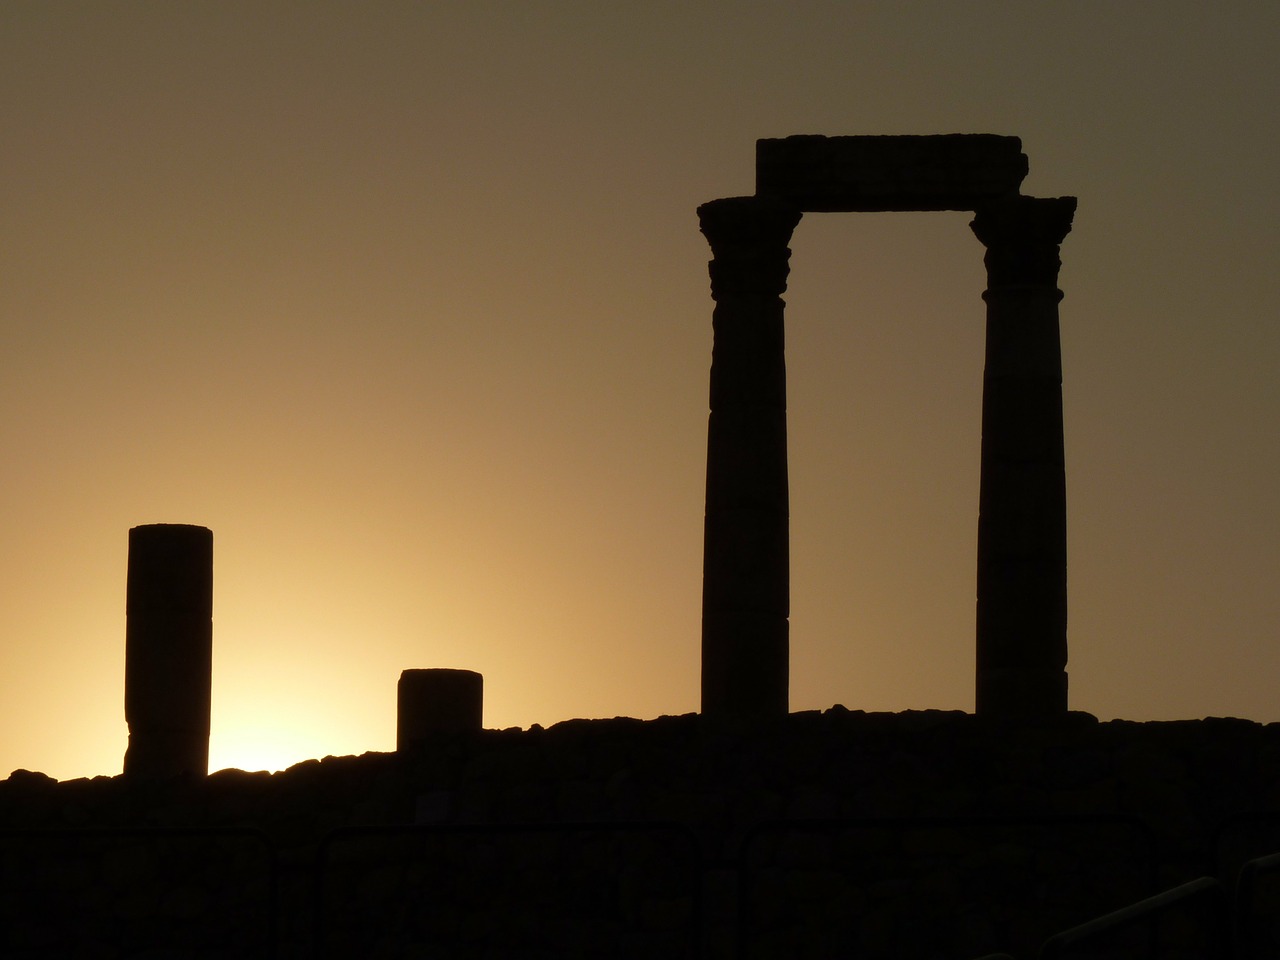 citadel hill,amman,jordan,holiday,travel,middle east,ruin,stone,pillar,sunset,romance,love,free pictures, free photos, free images, royalty free, free illustrations, public domain